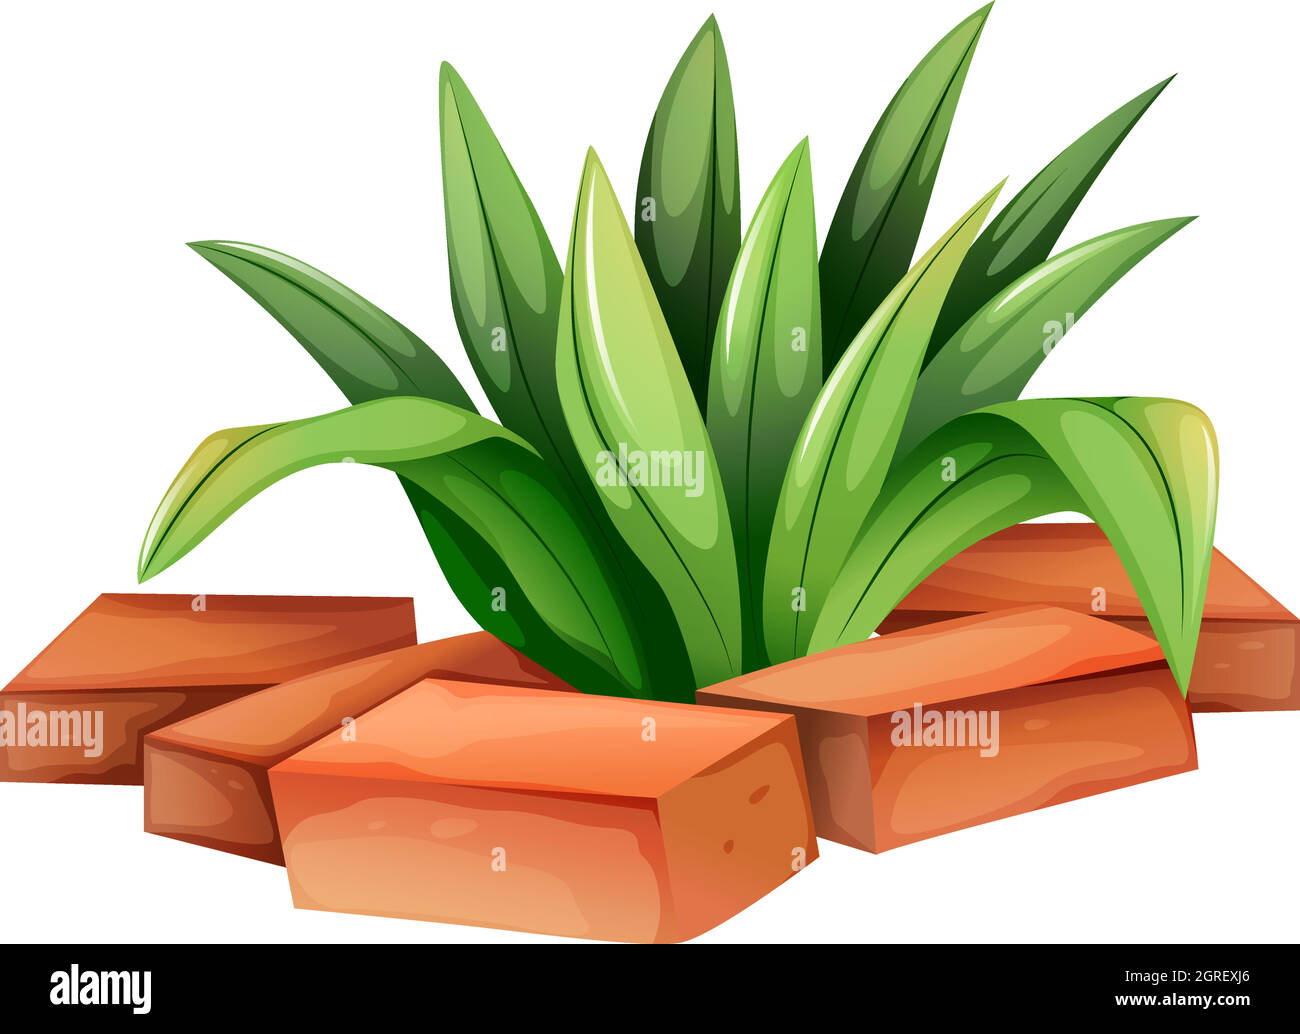 A plant with elongated leaves Stock Vector